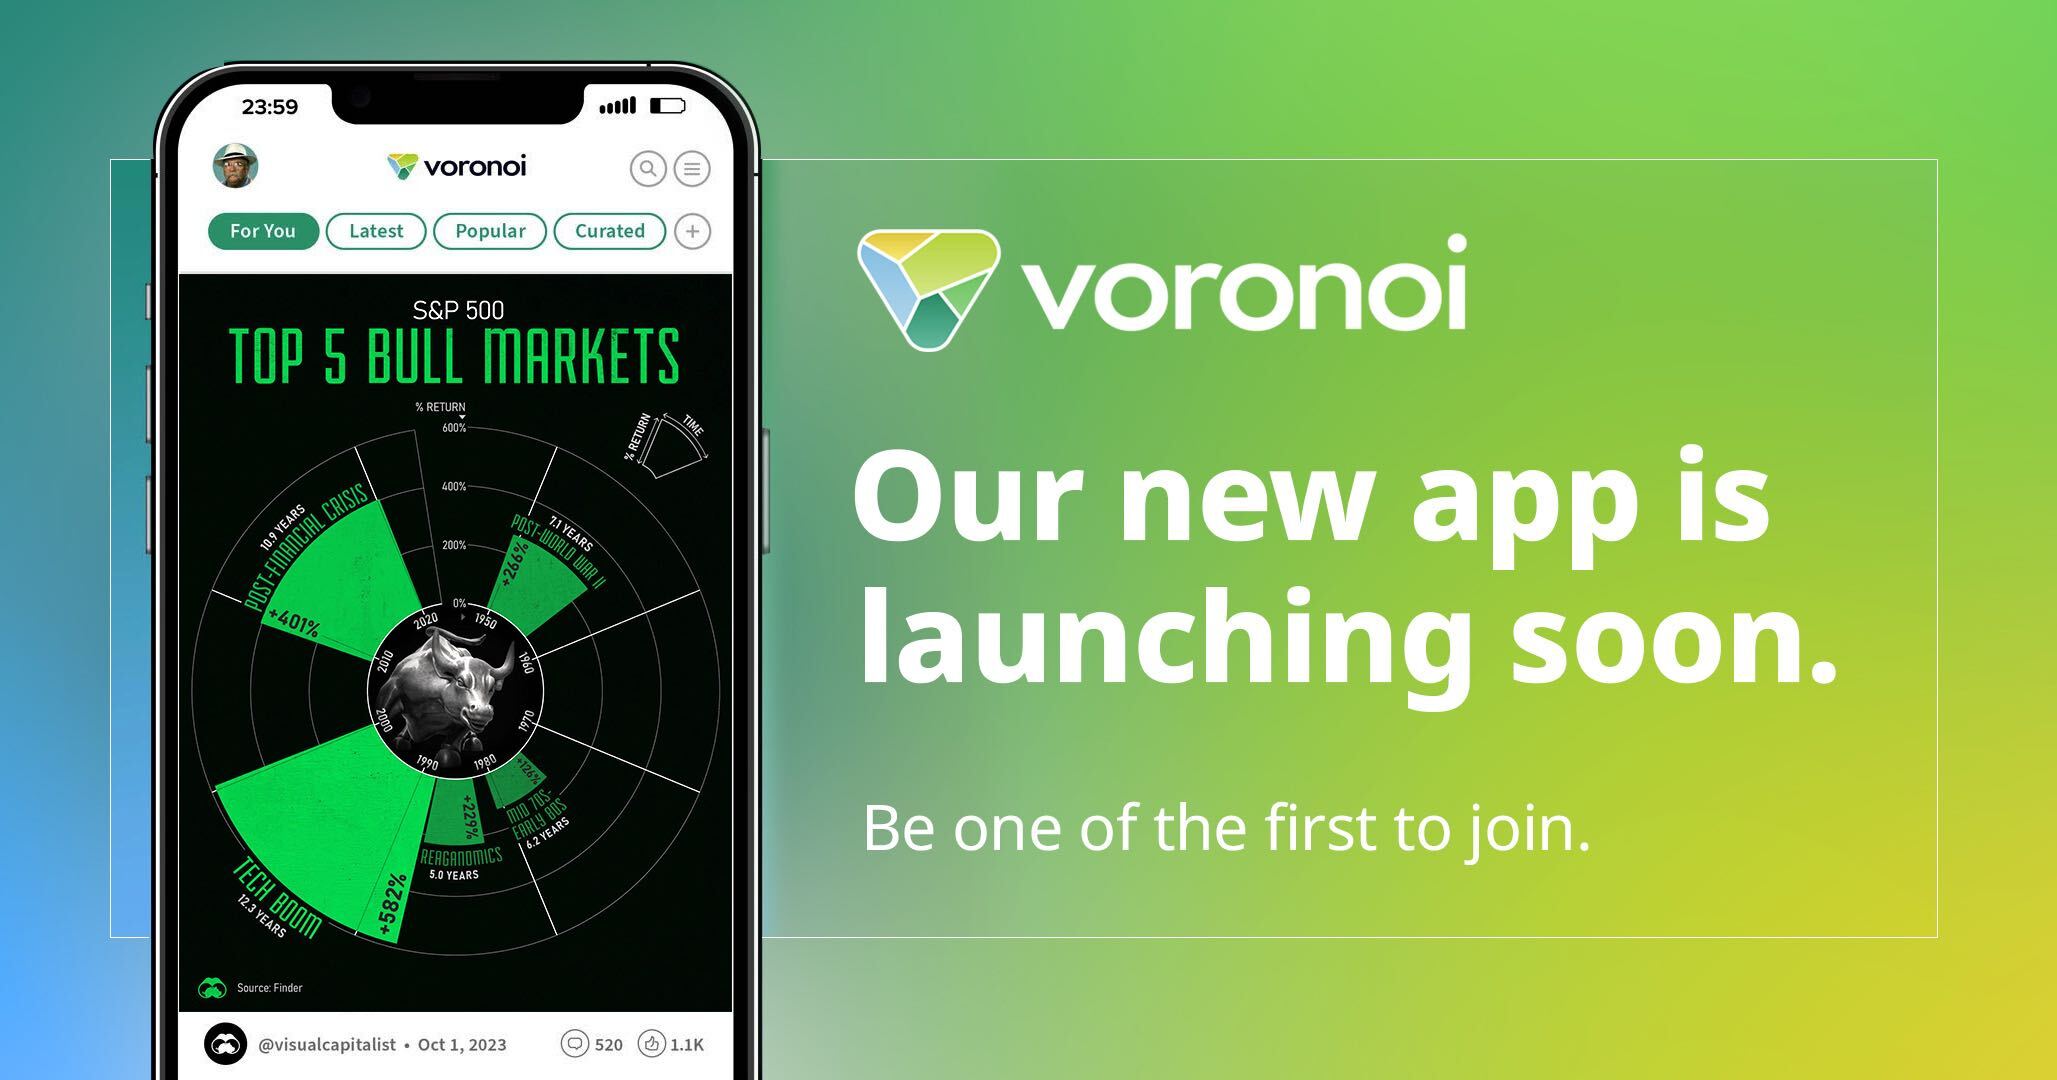 Voronoi is the new app from Visual Capitalist. Launching soon.